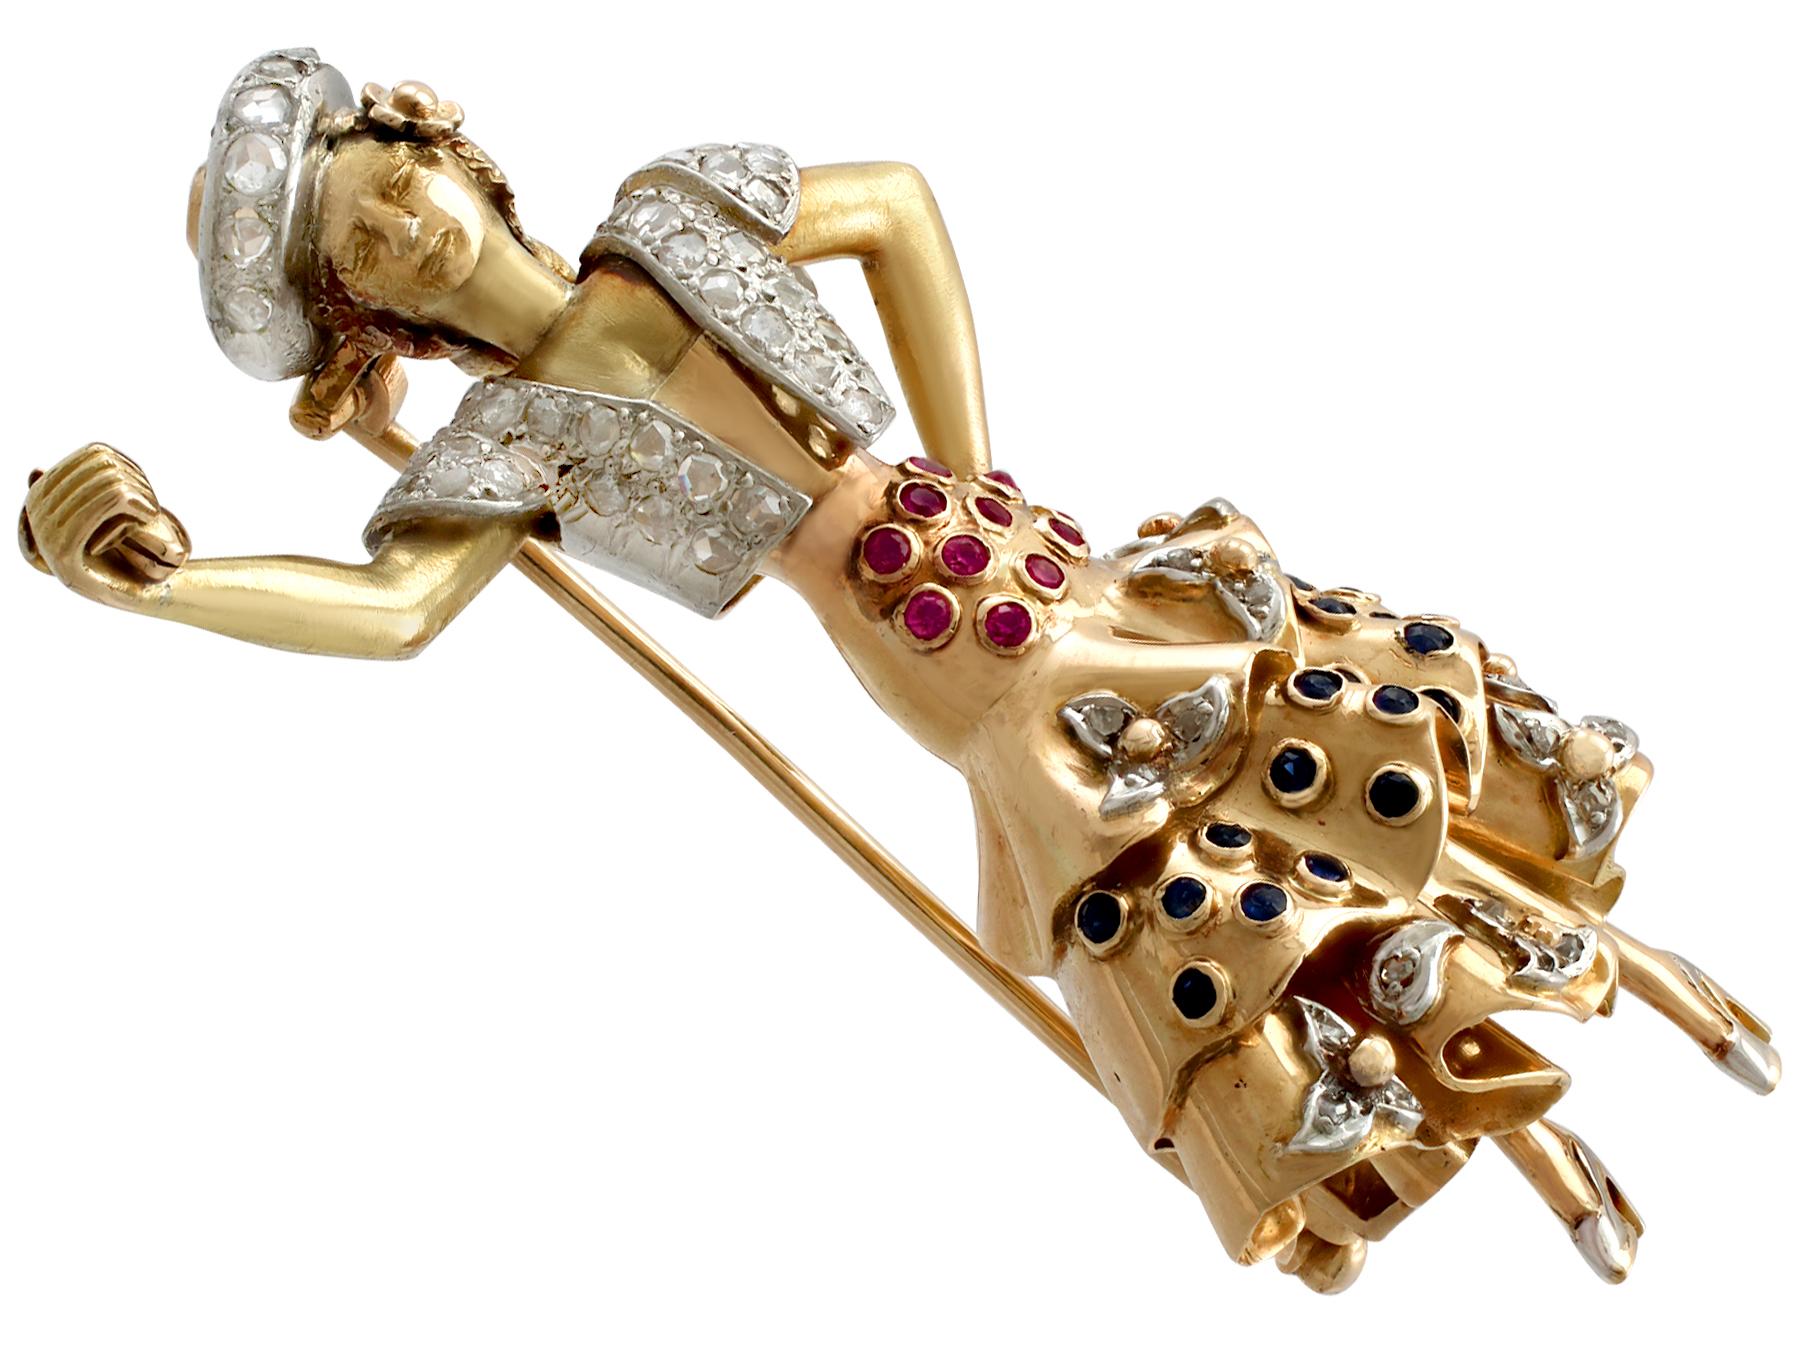 A stunning vintage 1.04 carat diamond, 0.40 carat sapphire, 0.31 carat ruby, 18 carat yellow and rose gold and platinum set 'flamenco dancer' brooch; part of our diverse vintage jewellery collections.

This stunning multi-gem brooch has been crafted